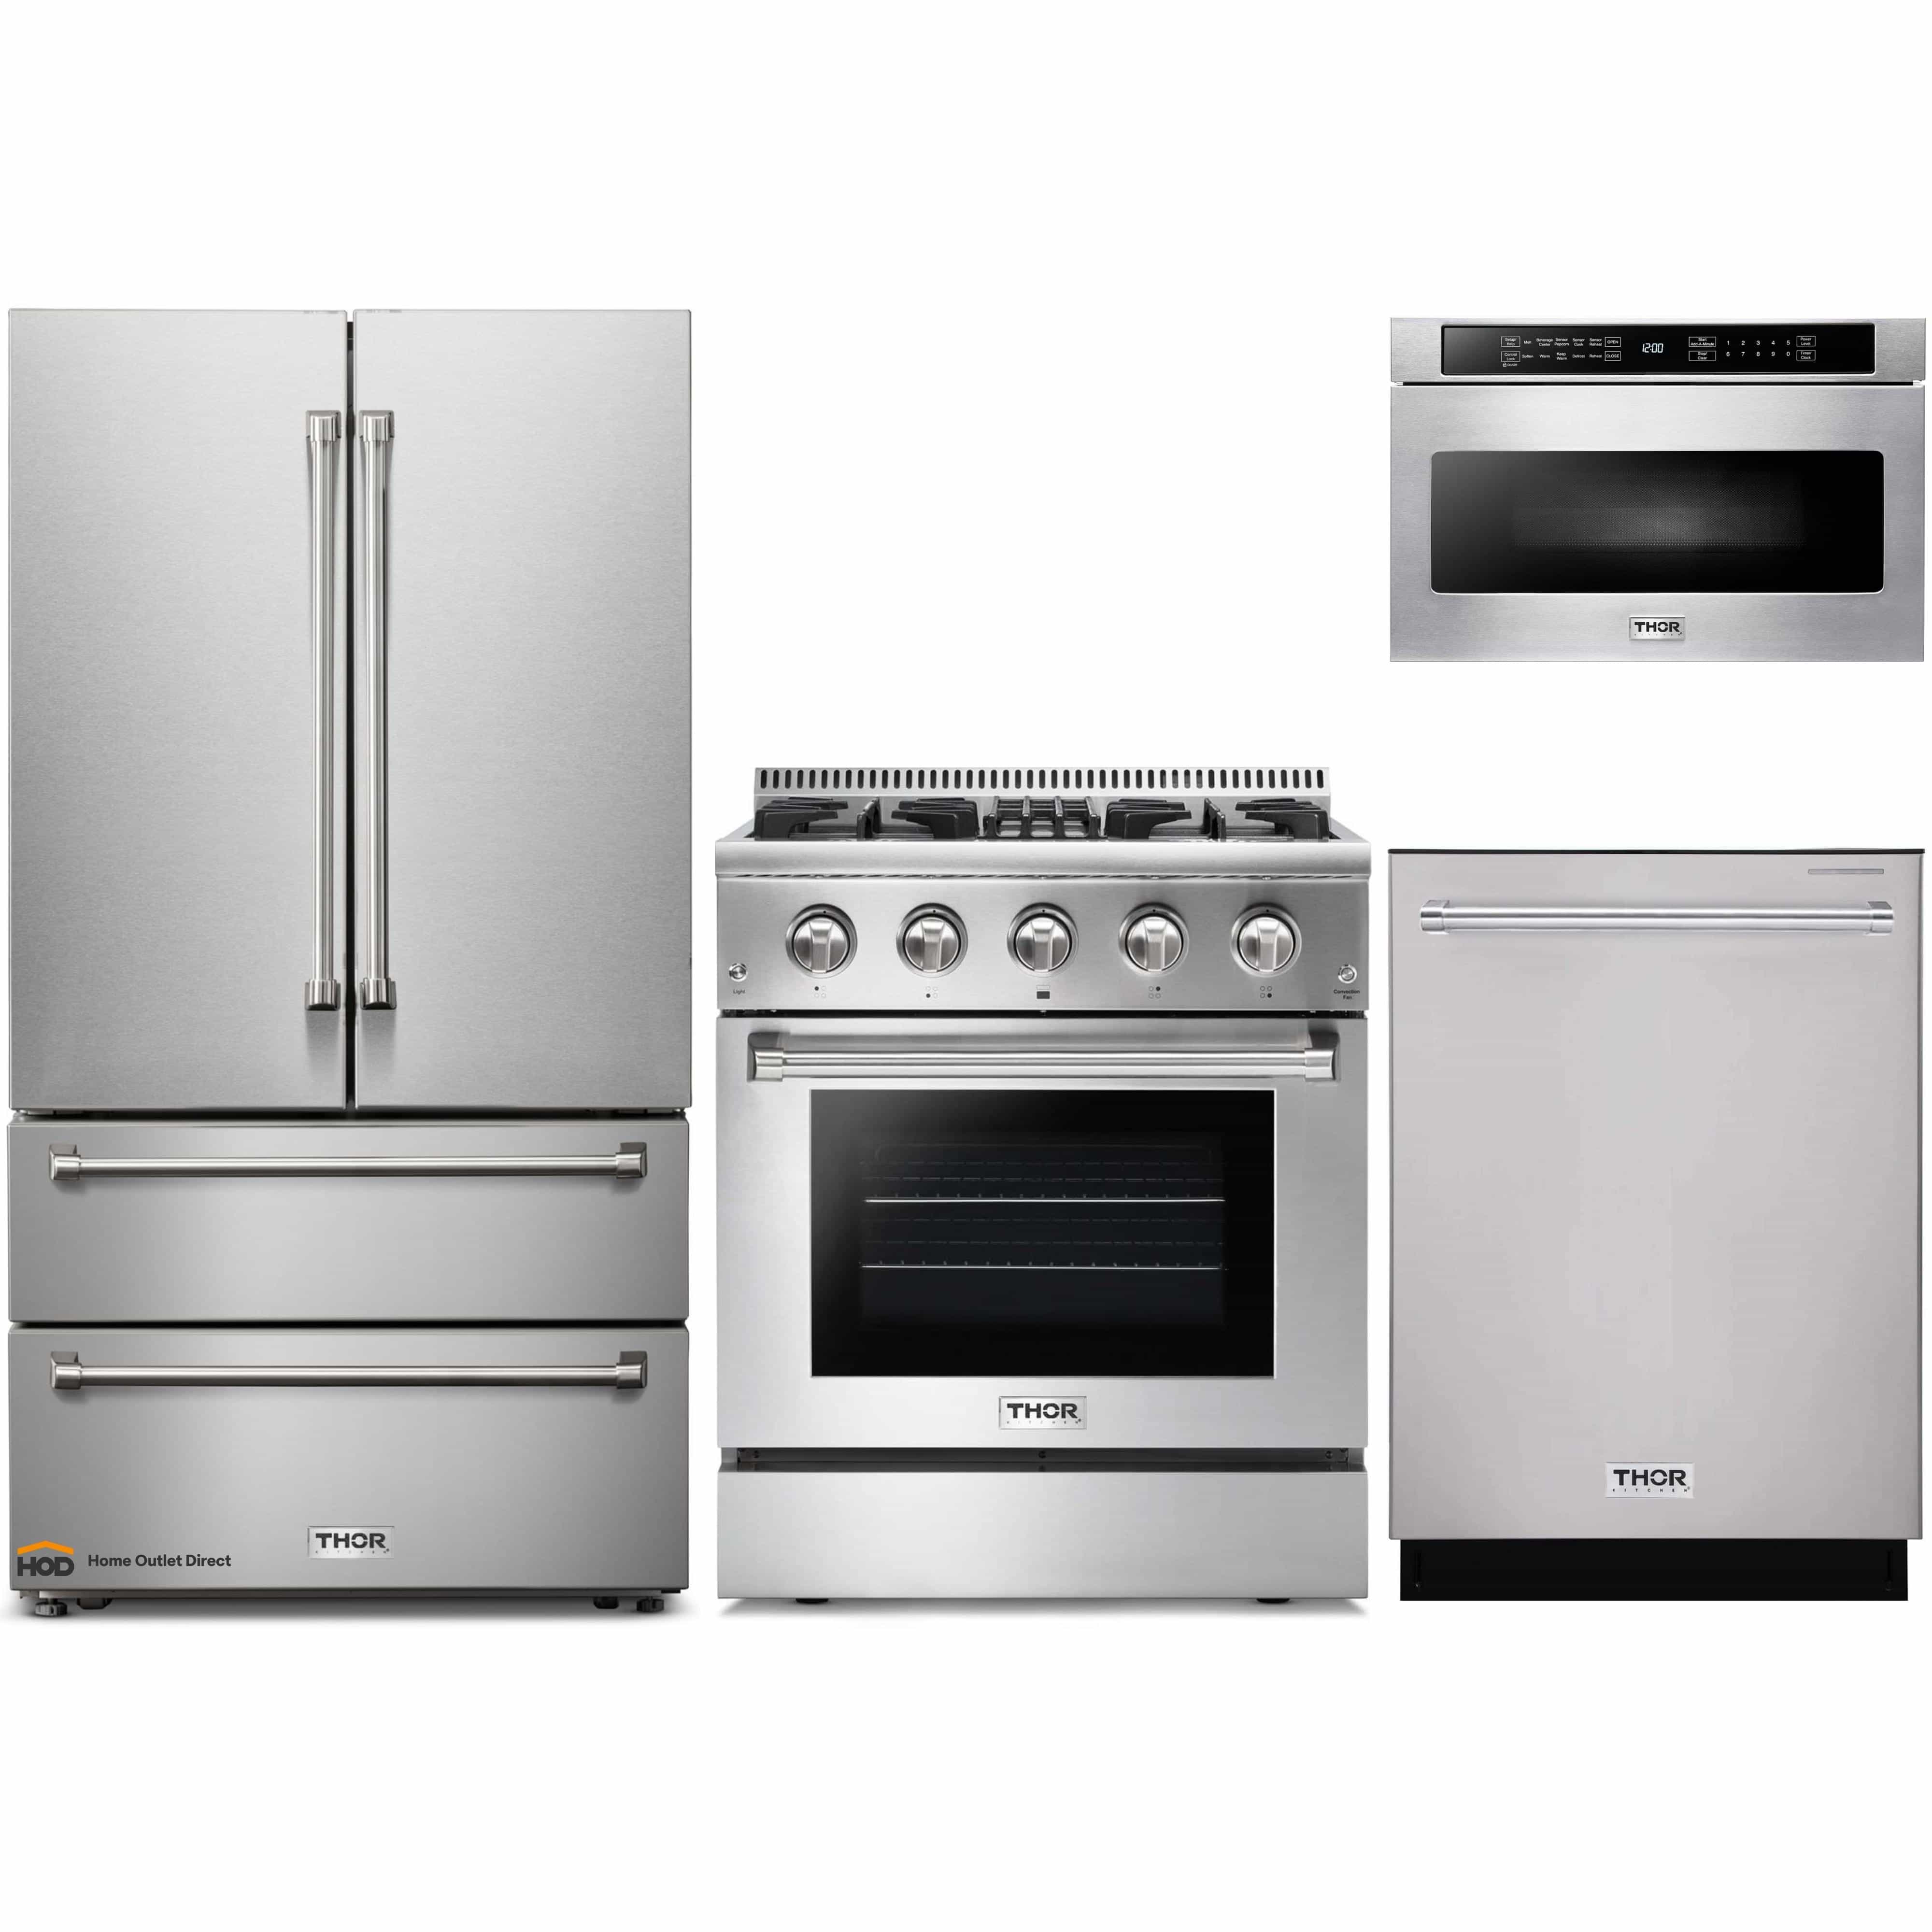 Thor Kitchen 4-Piece Pro Appliance Package - 30-Inch Dual Fuel Range, French Door Refrigerator, Dishwasher, and Microwave Drawer in Stainless Steel